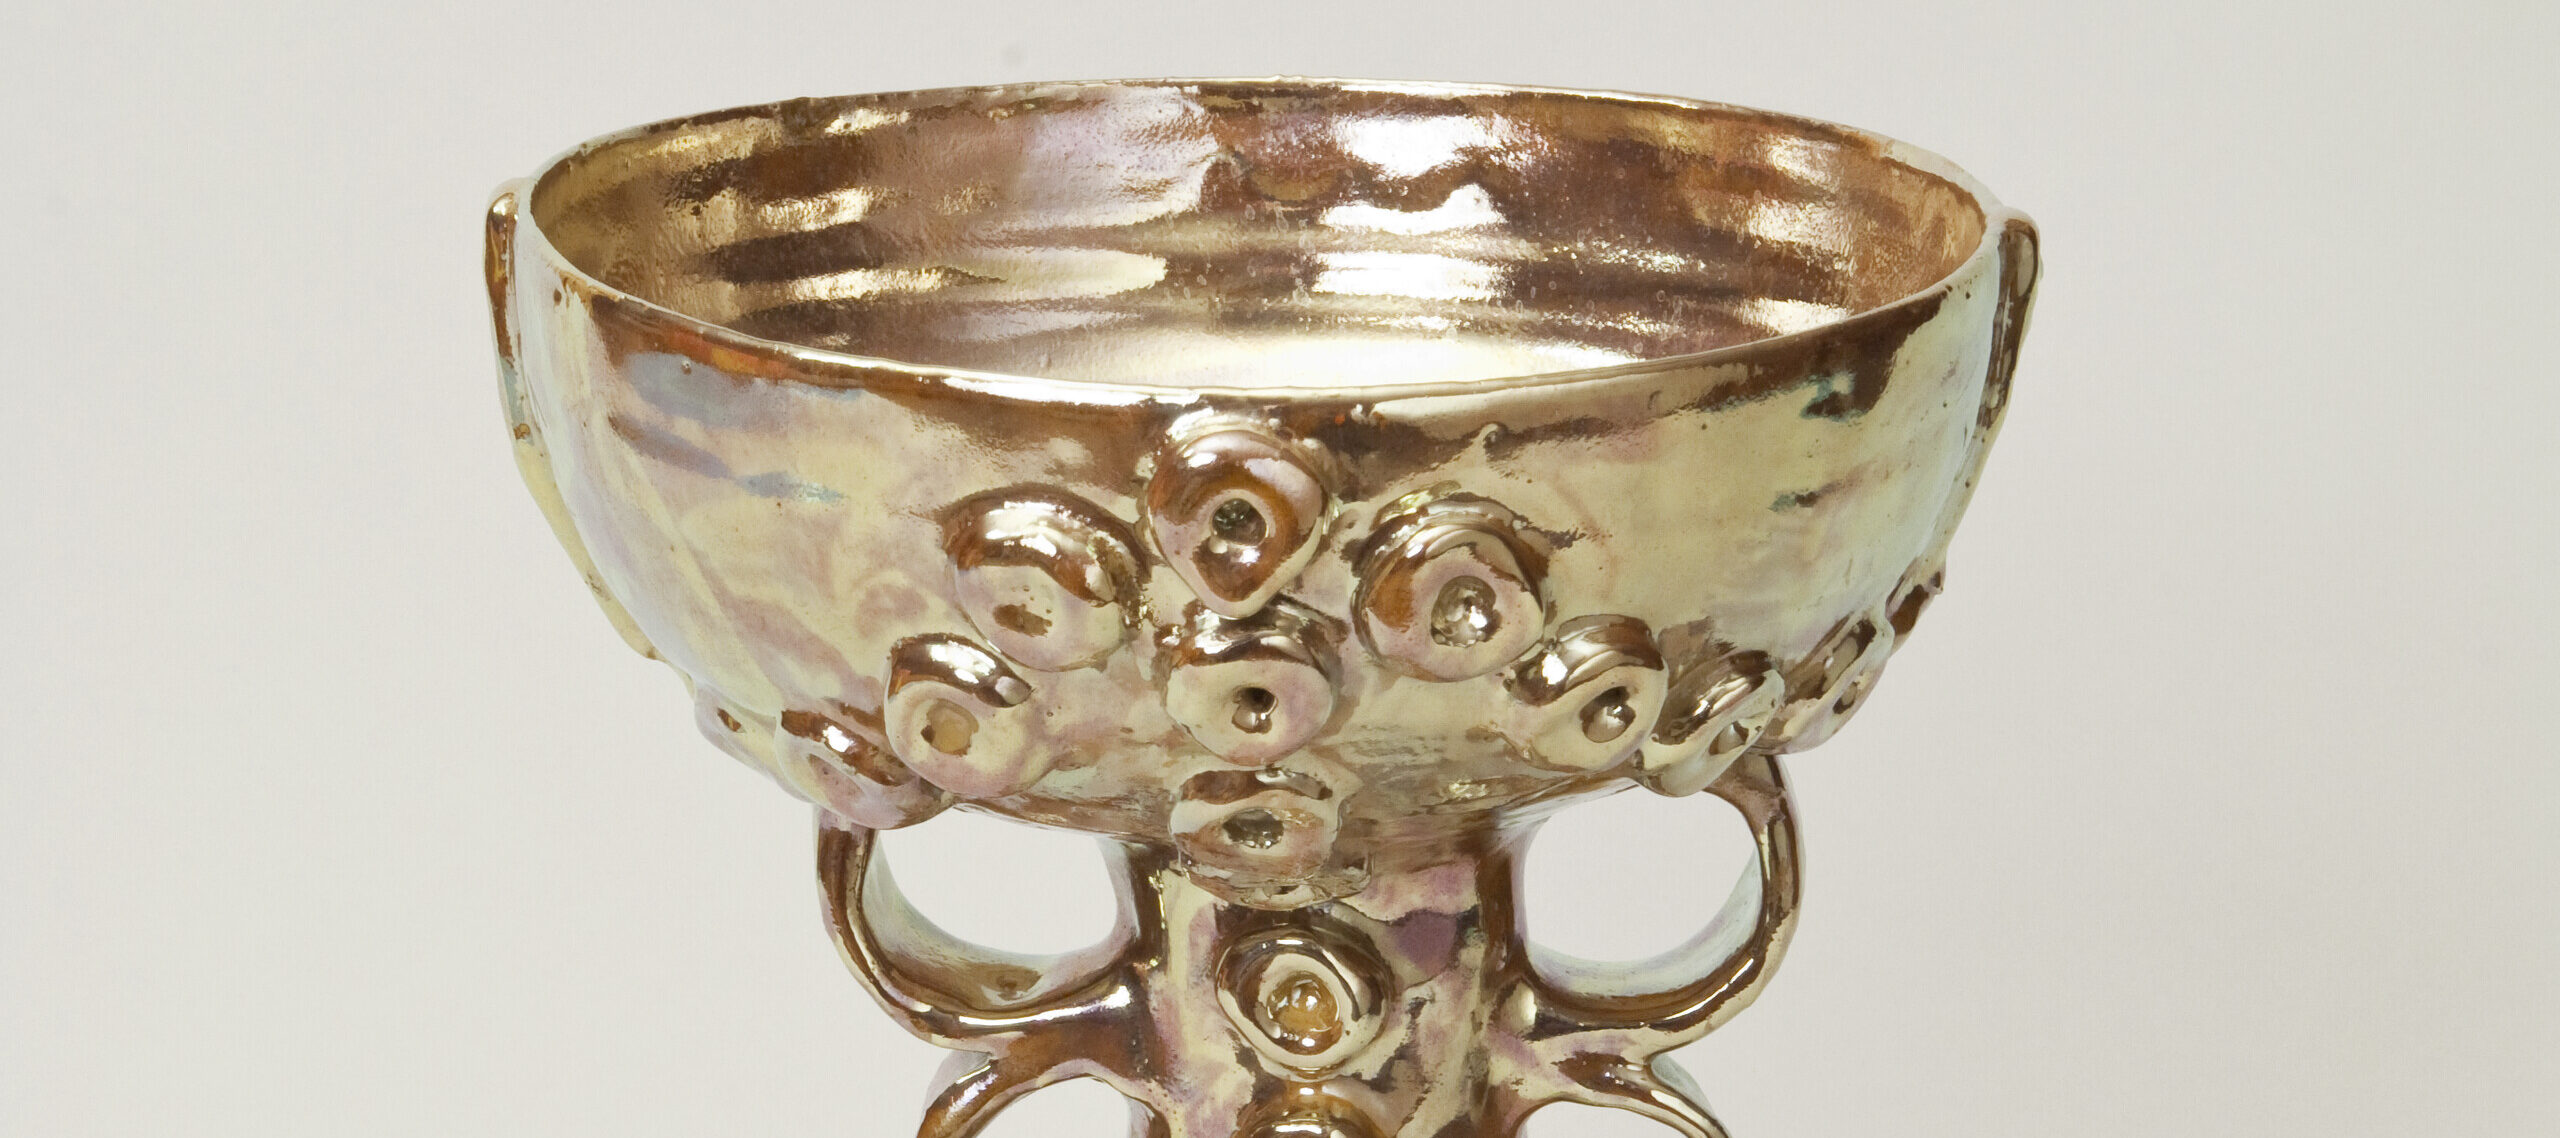 Golden lusterware chalice features a wide bowl above two looped handles on either side of the cone-shaped base. Raised circular decorations adorn the base and the outside of the bowl.